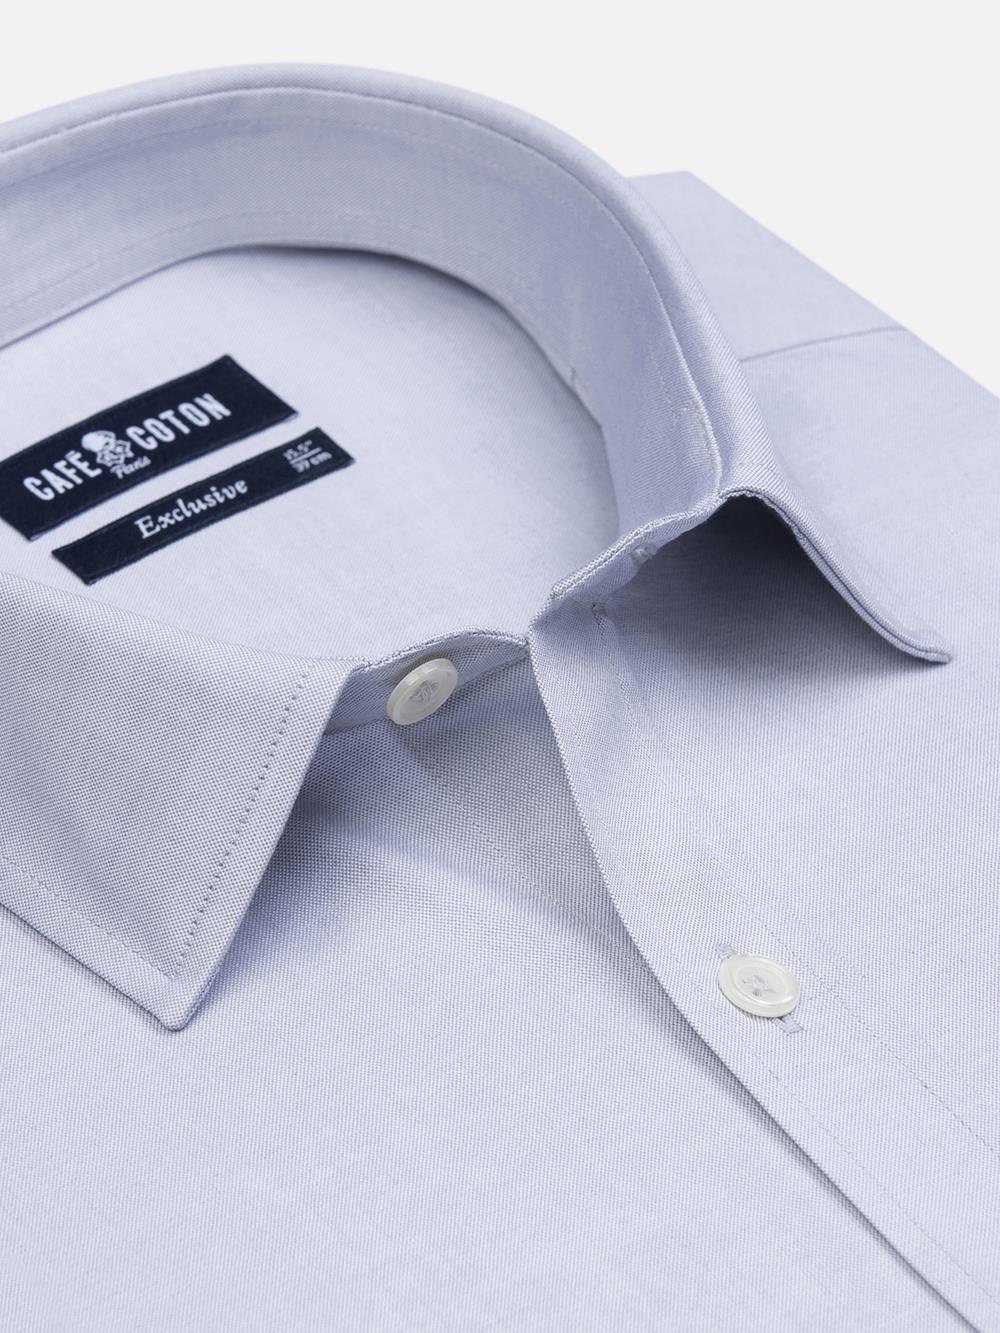 Grey pinpoint slim fit shirt - Small collar